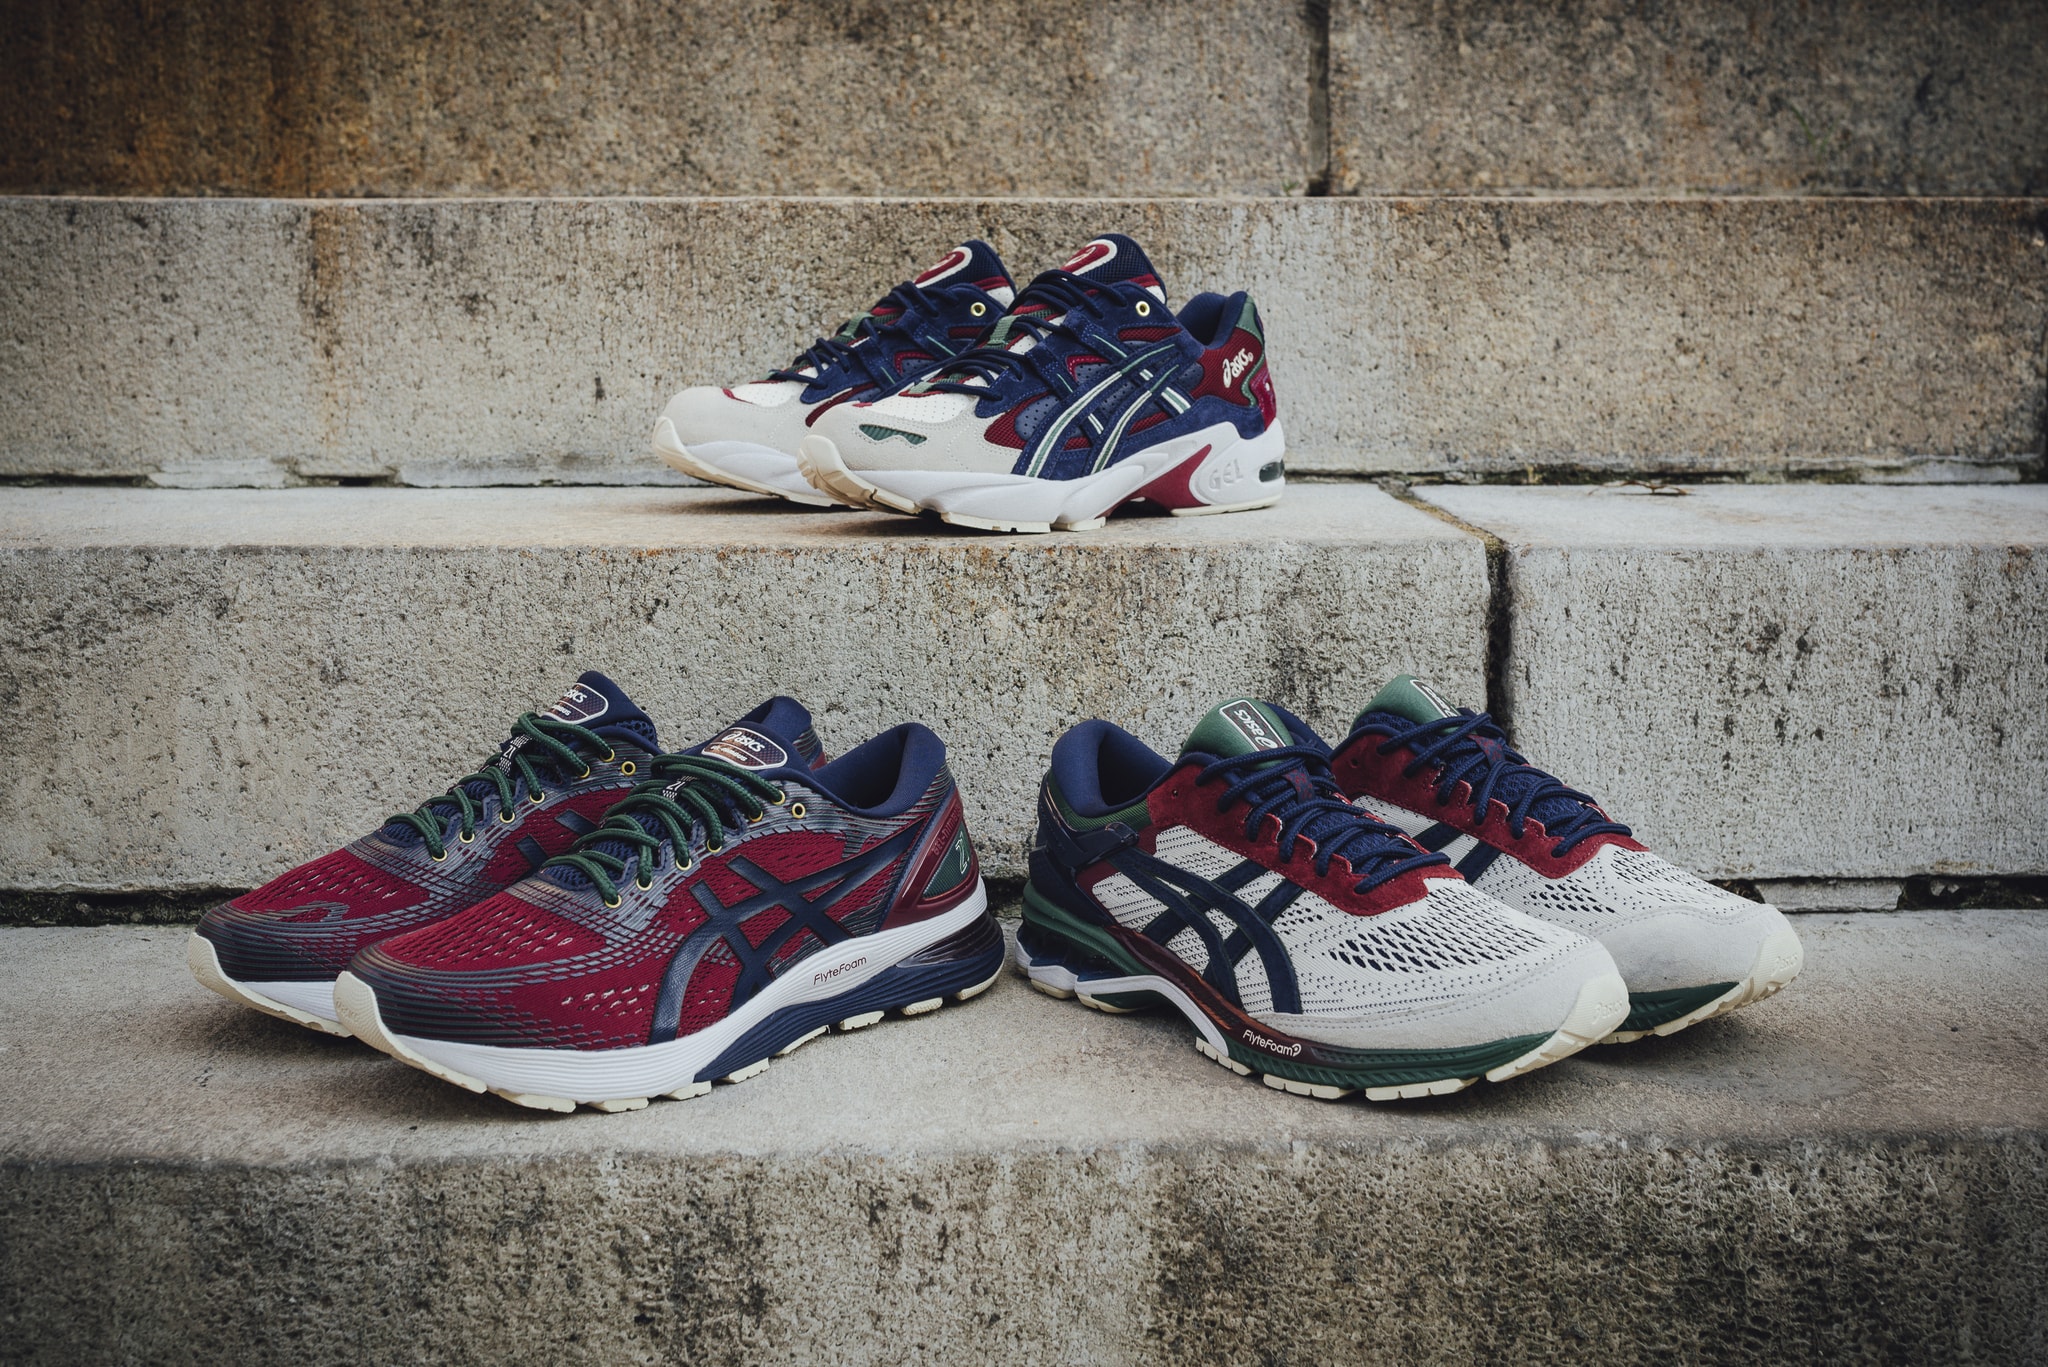 ASICS Academic Scholar gel kayano nimbus 21 26 5 og sneaker shoe sneakers shoes pack collection release info date cost price 2019 august